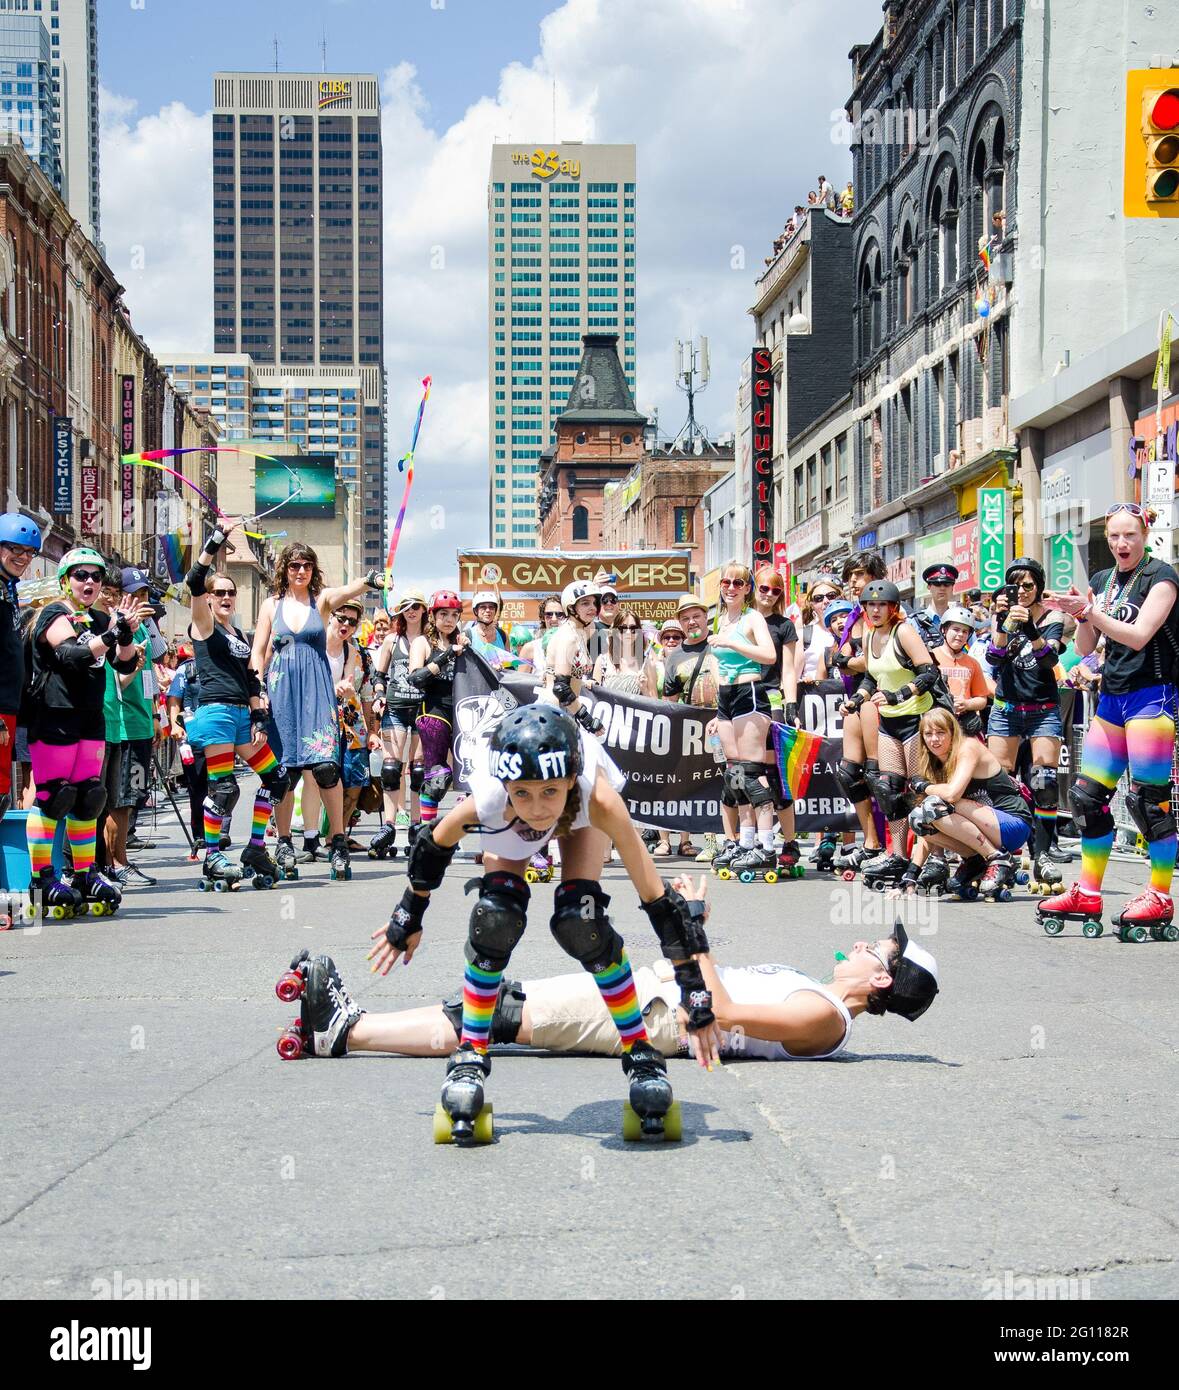 Street performers on skates at pride parade Toronto, with crowds of revelers cheering in the background dressed in rainbow colors and waving flags and Stock Photo